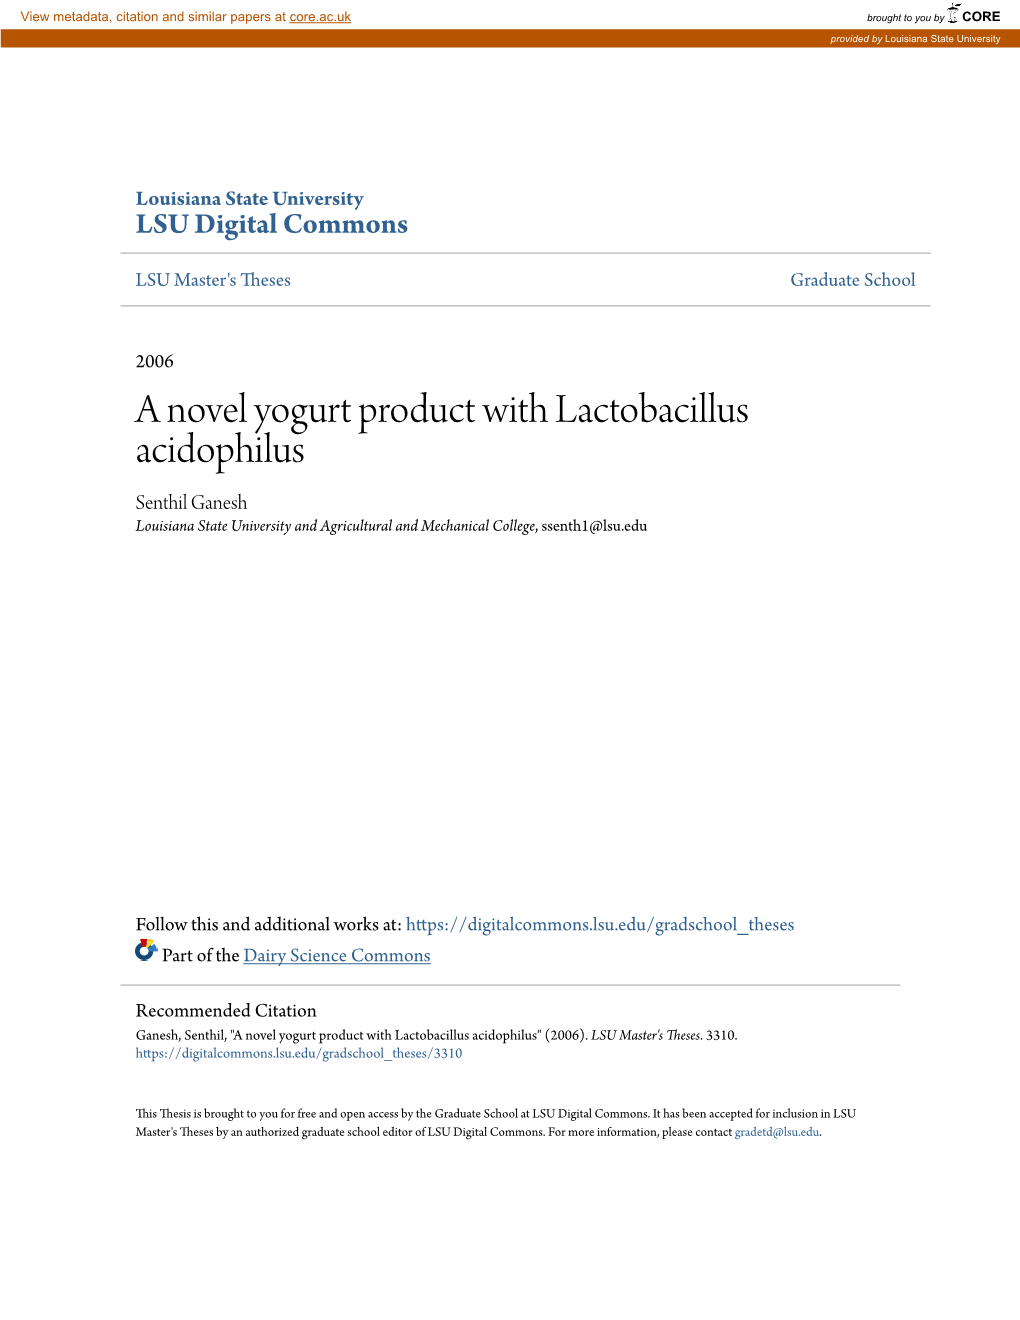 A Novel Yogurt Product with Lactobacillus Acidophilus Senthil Ganesh Louisiana State University and Agricultural and Mechanical College, Ssenth1@Lsu.Edu